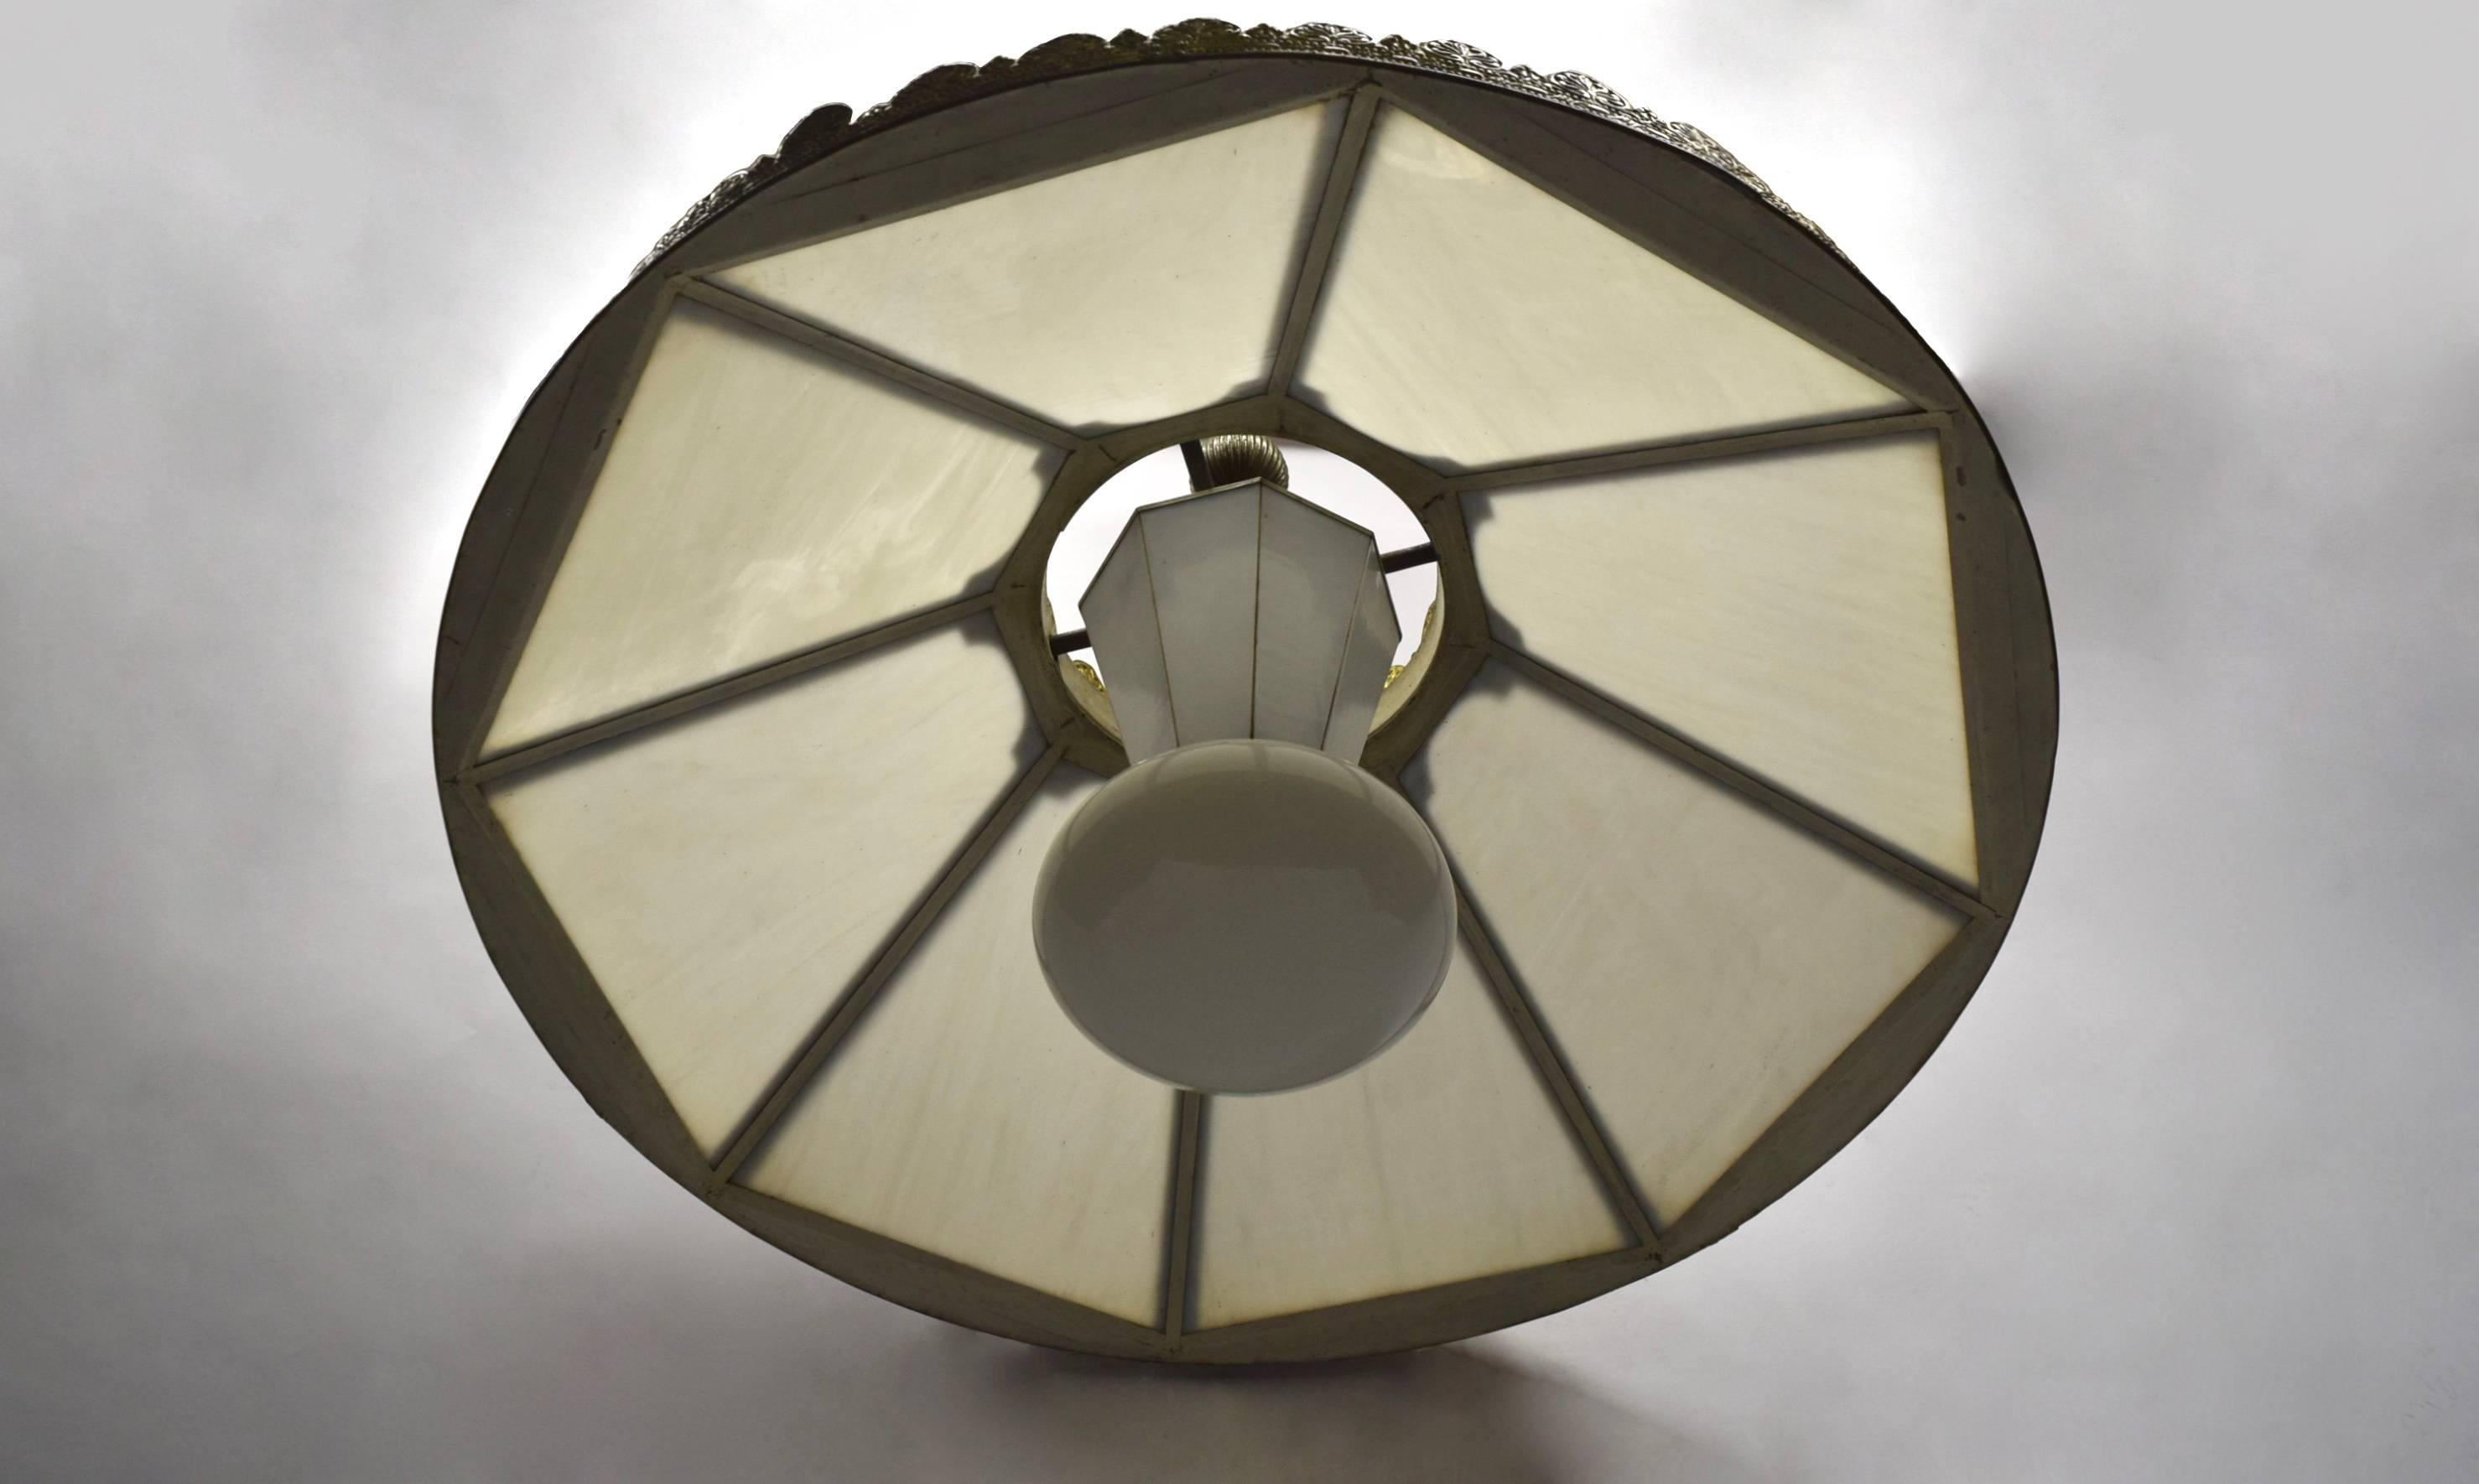 Art Nouveau Ceiling Light by I.P. Frink 1880s USA Originally Oil Lit, Converted to Electric For Sale